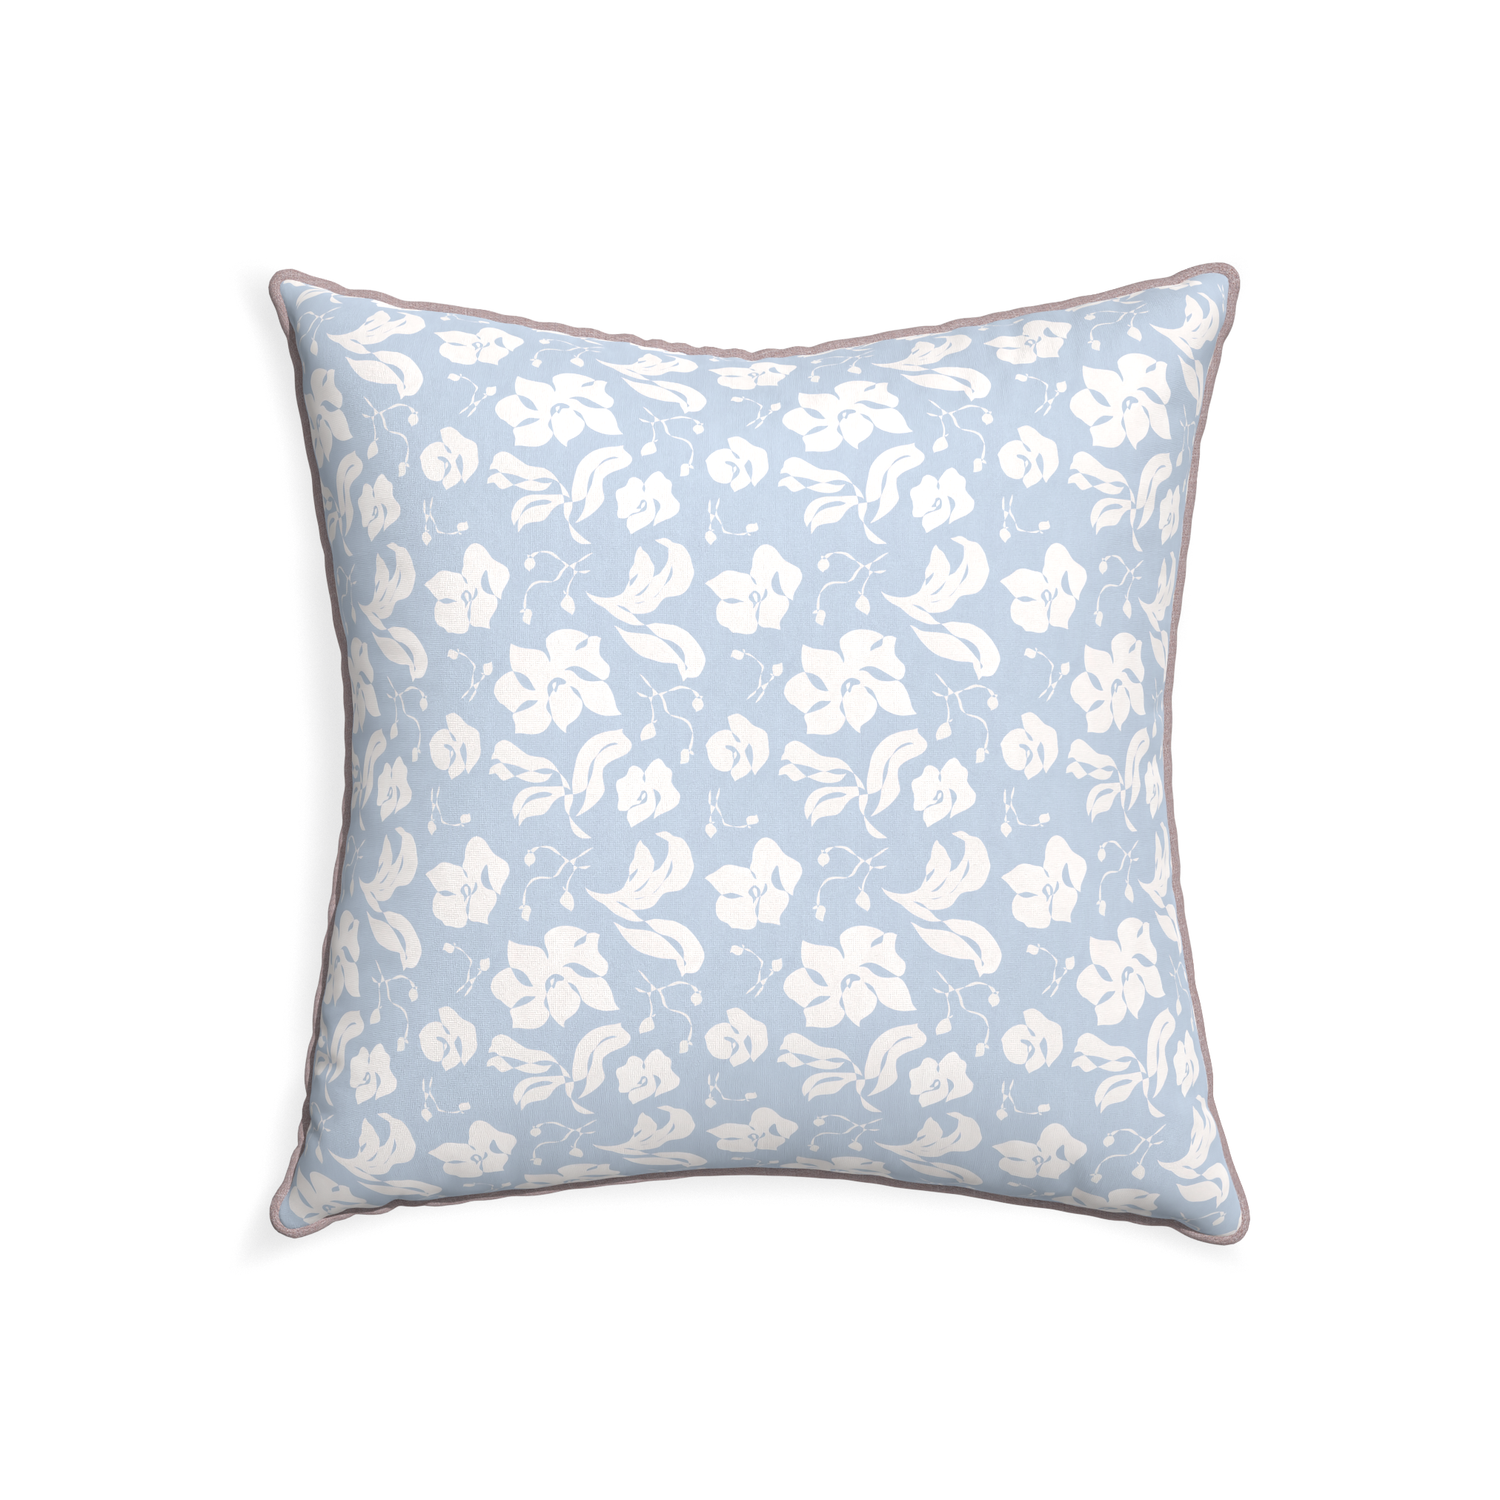 22-square georgia custom cornflower blue floralpillow with orchid piping on white background